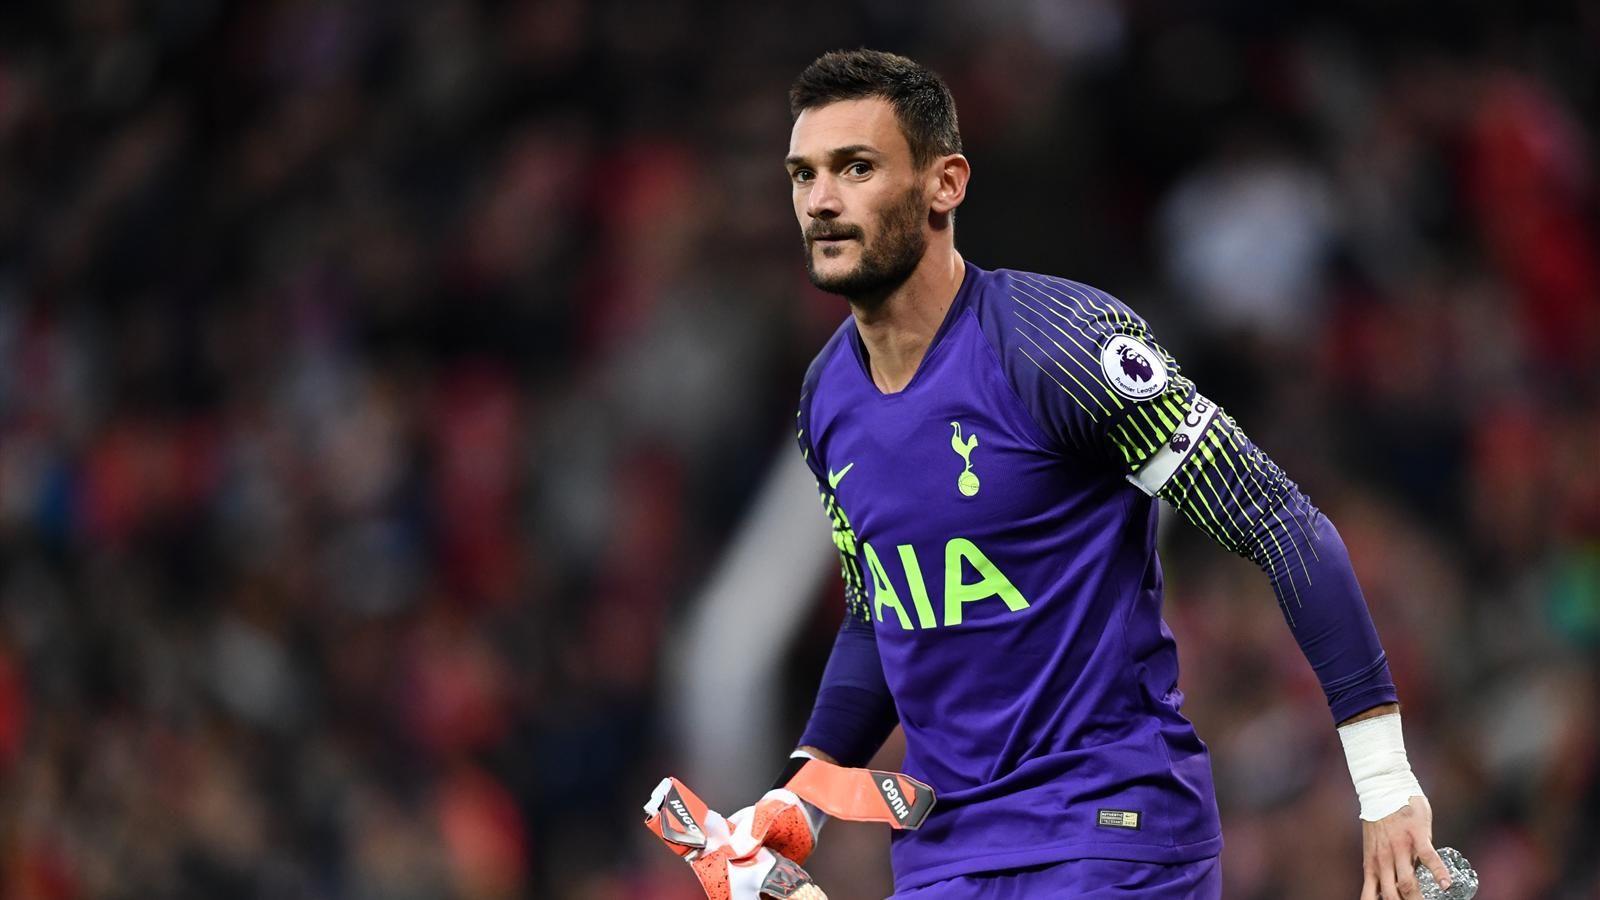 Hugo Lloris ruled out for Tottenham's trip to Watford with thigh